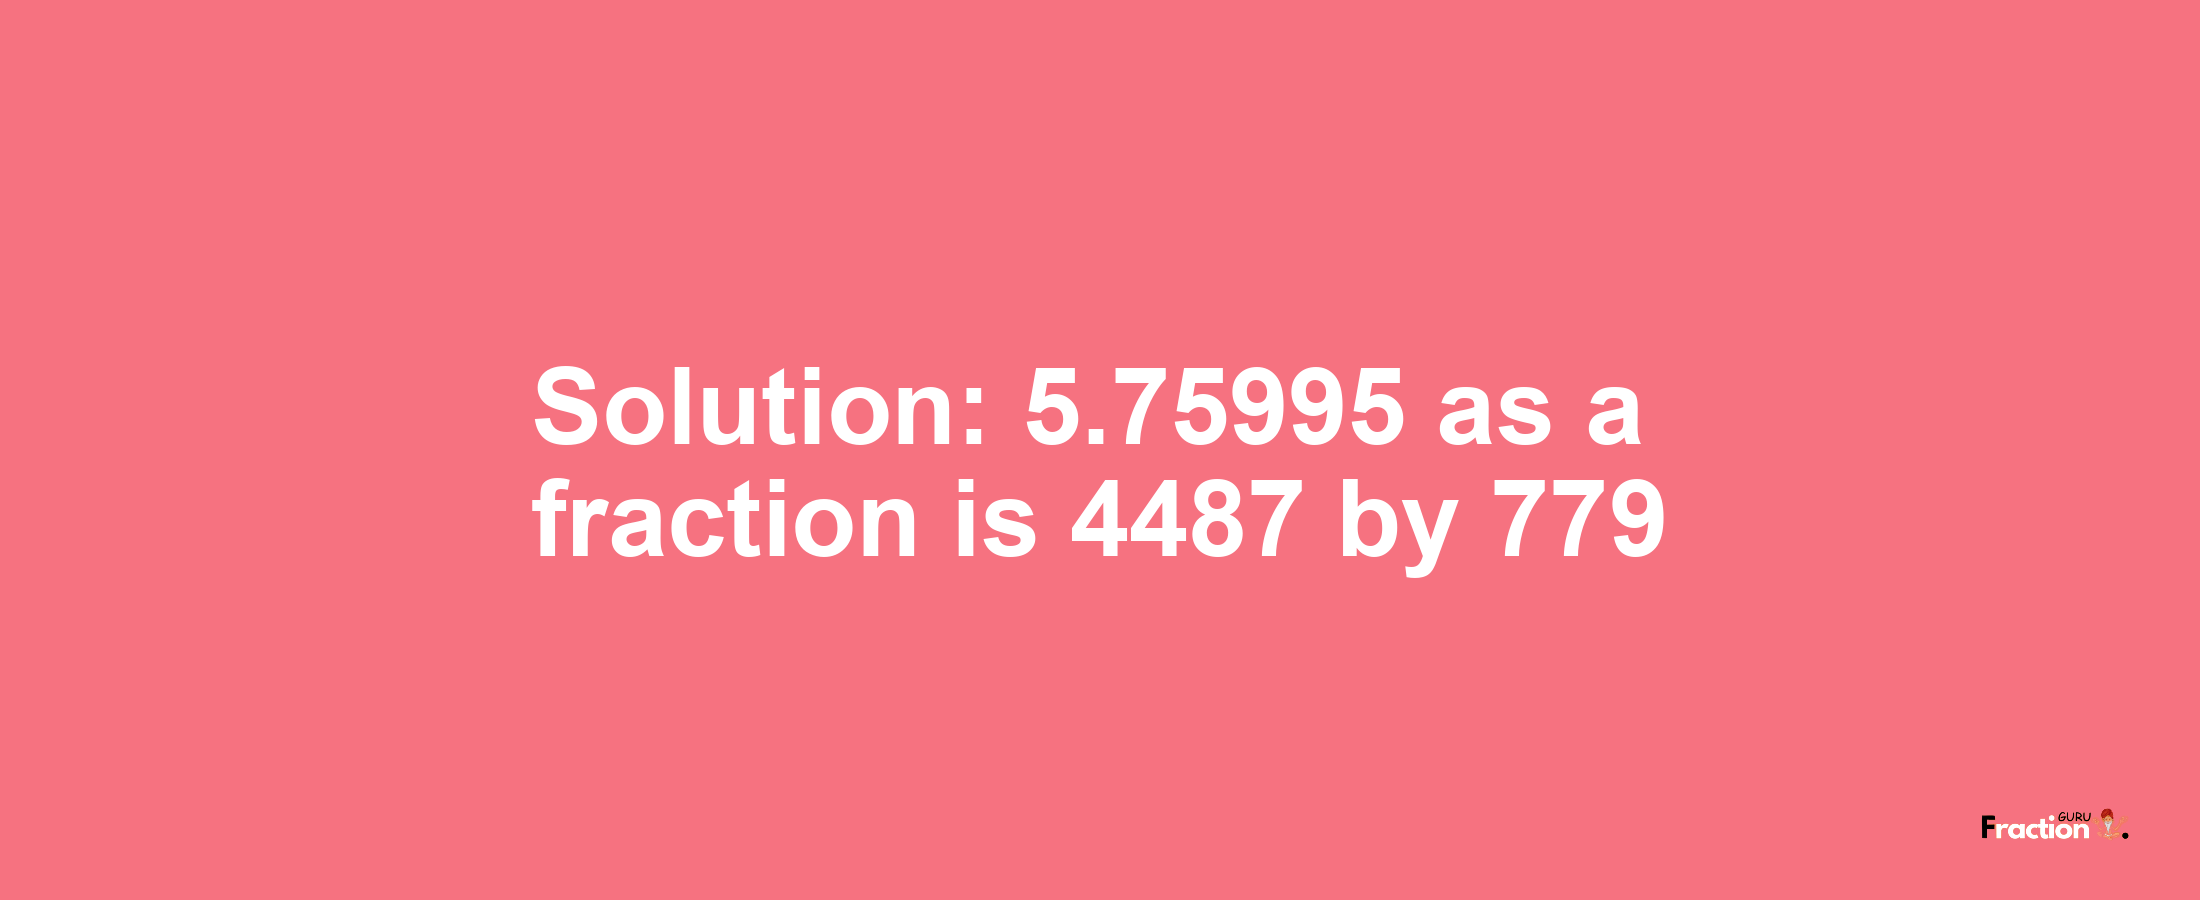 Solution:5.75995 as a fraction is 4487/779